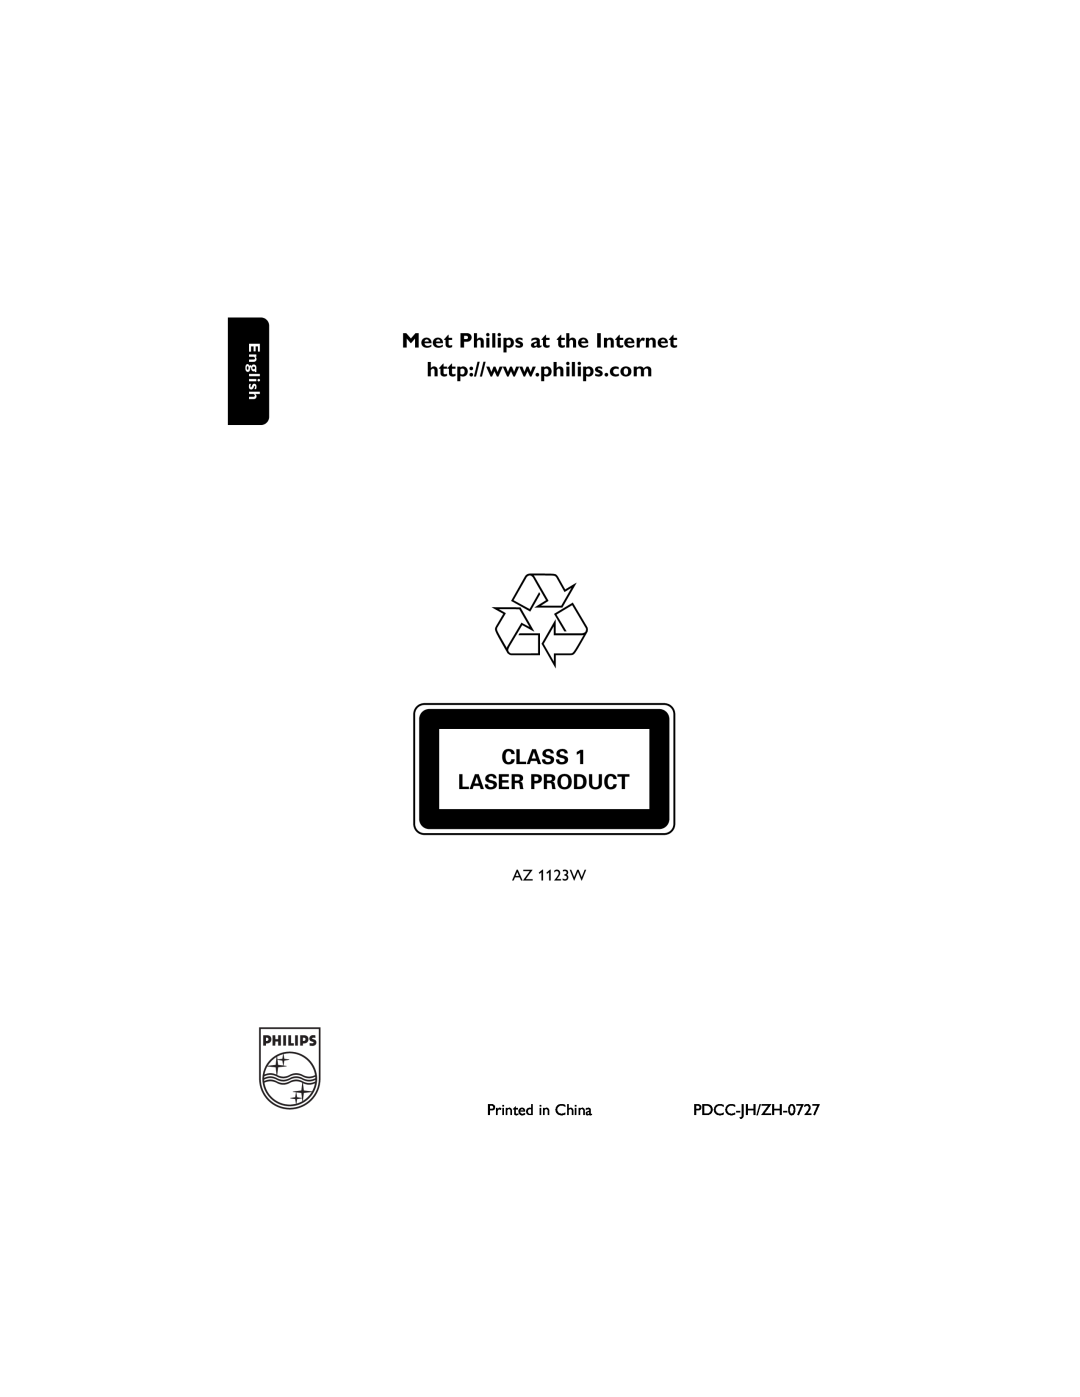 Philips AZ1123WCD user manual Meet Philips at the Internet, Class Laser Product, English 